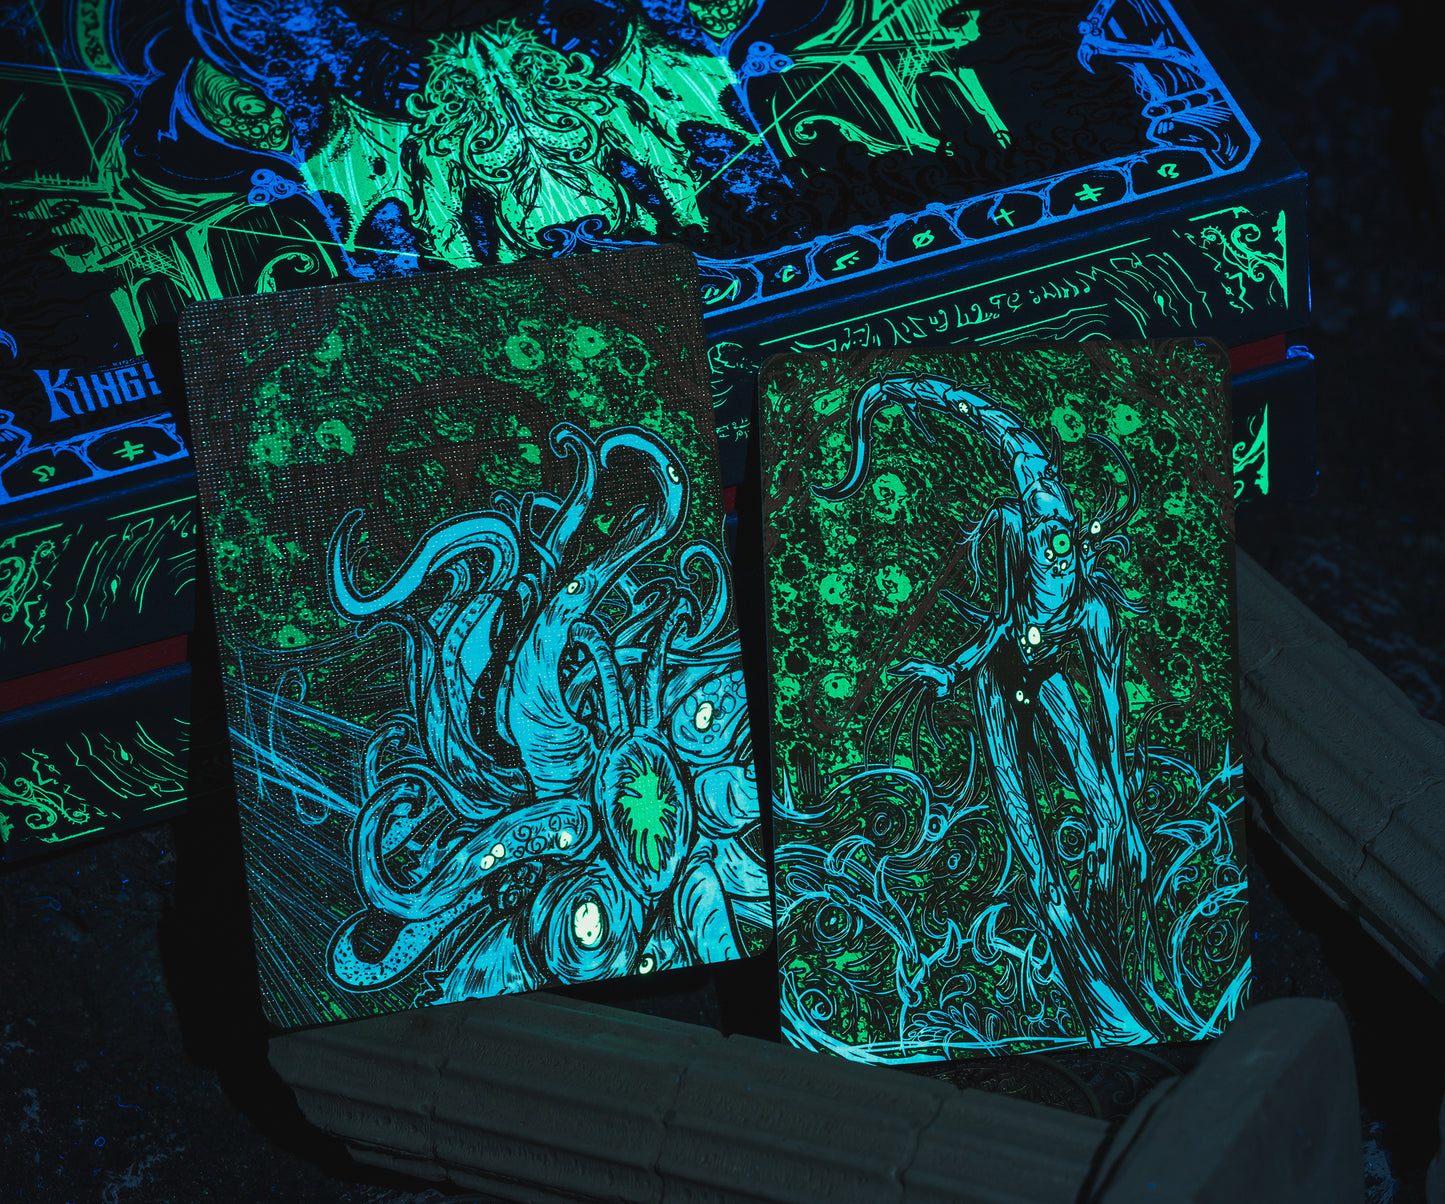 Curse of Chaos Cthulhu Mythos Playing Cards